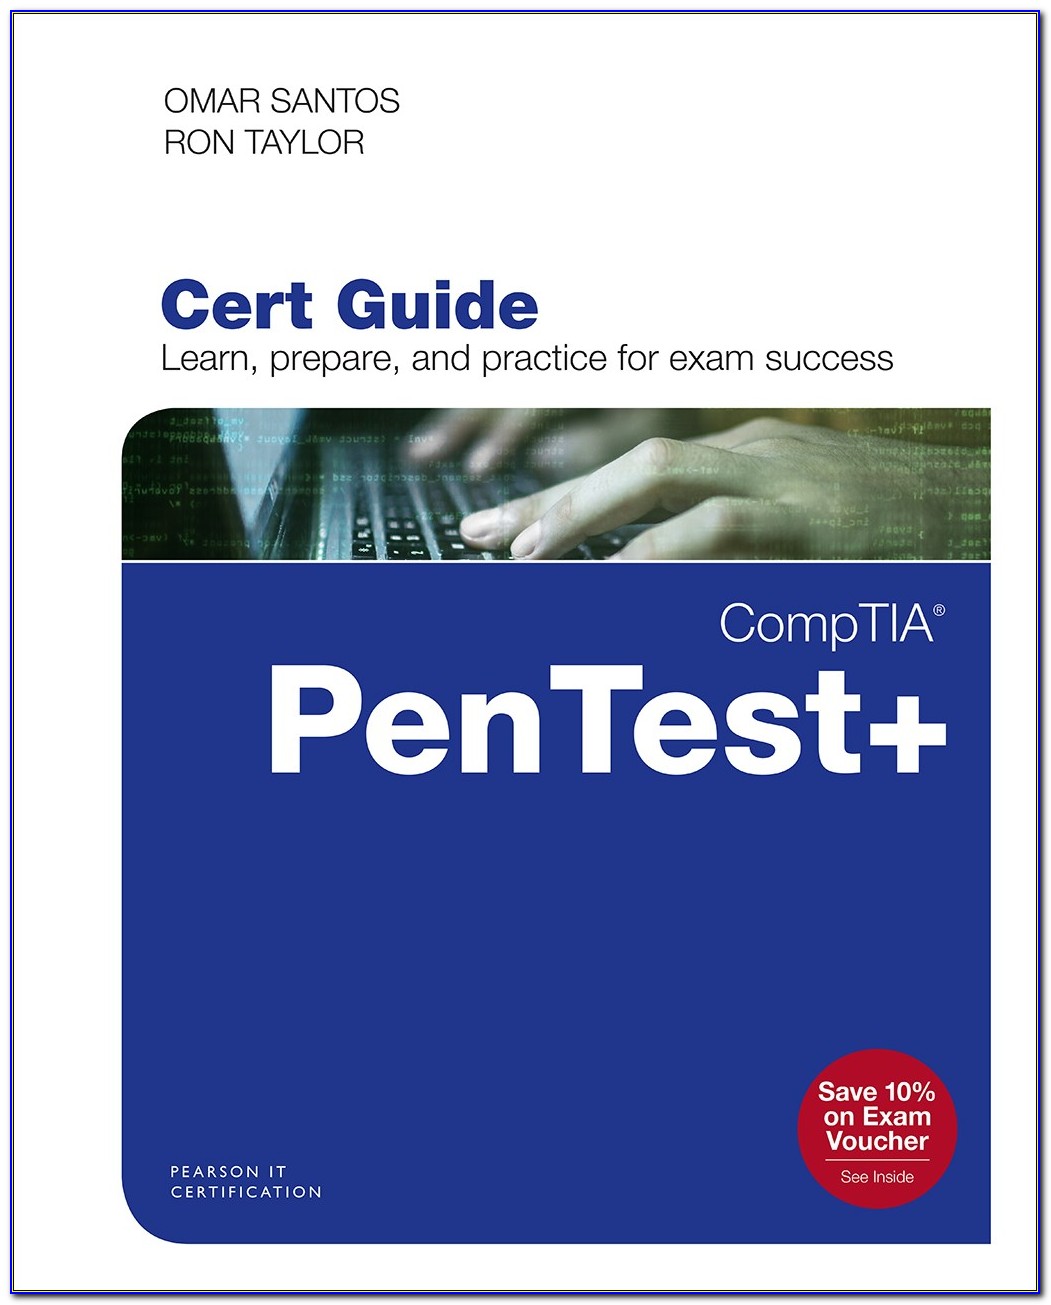 Pearson It Certification Reviews